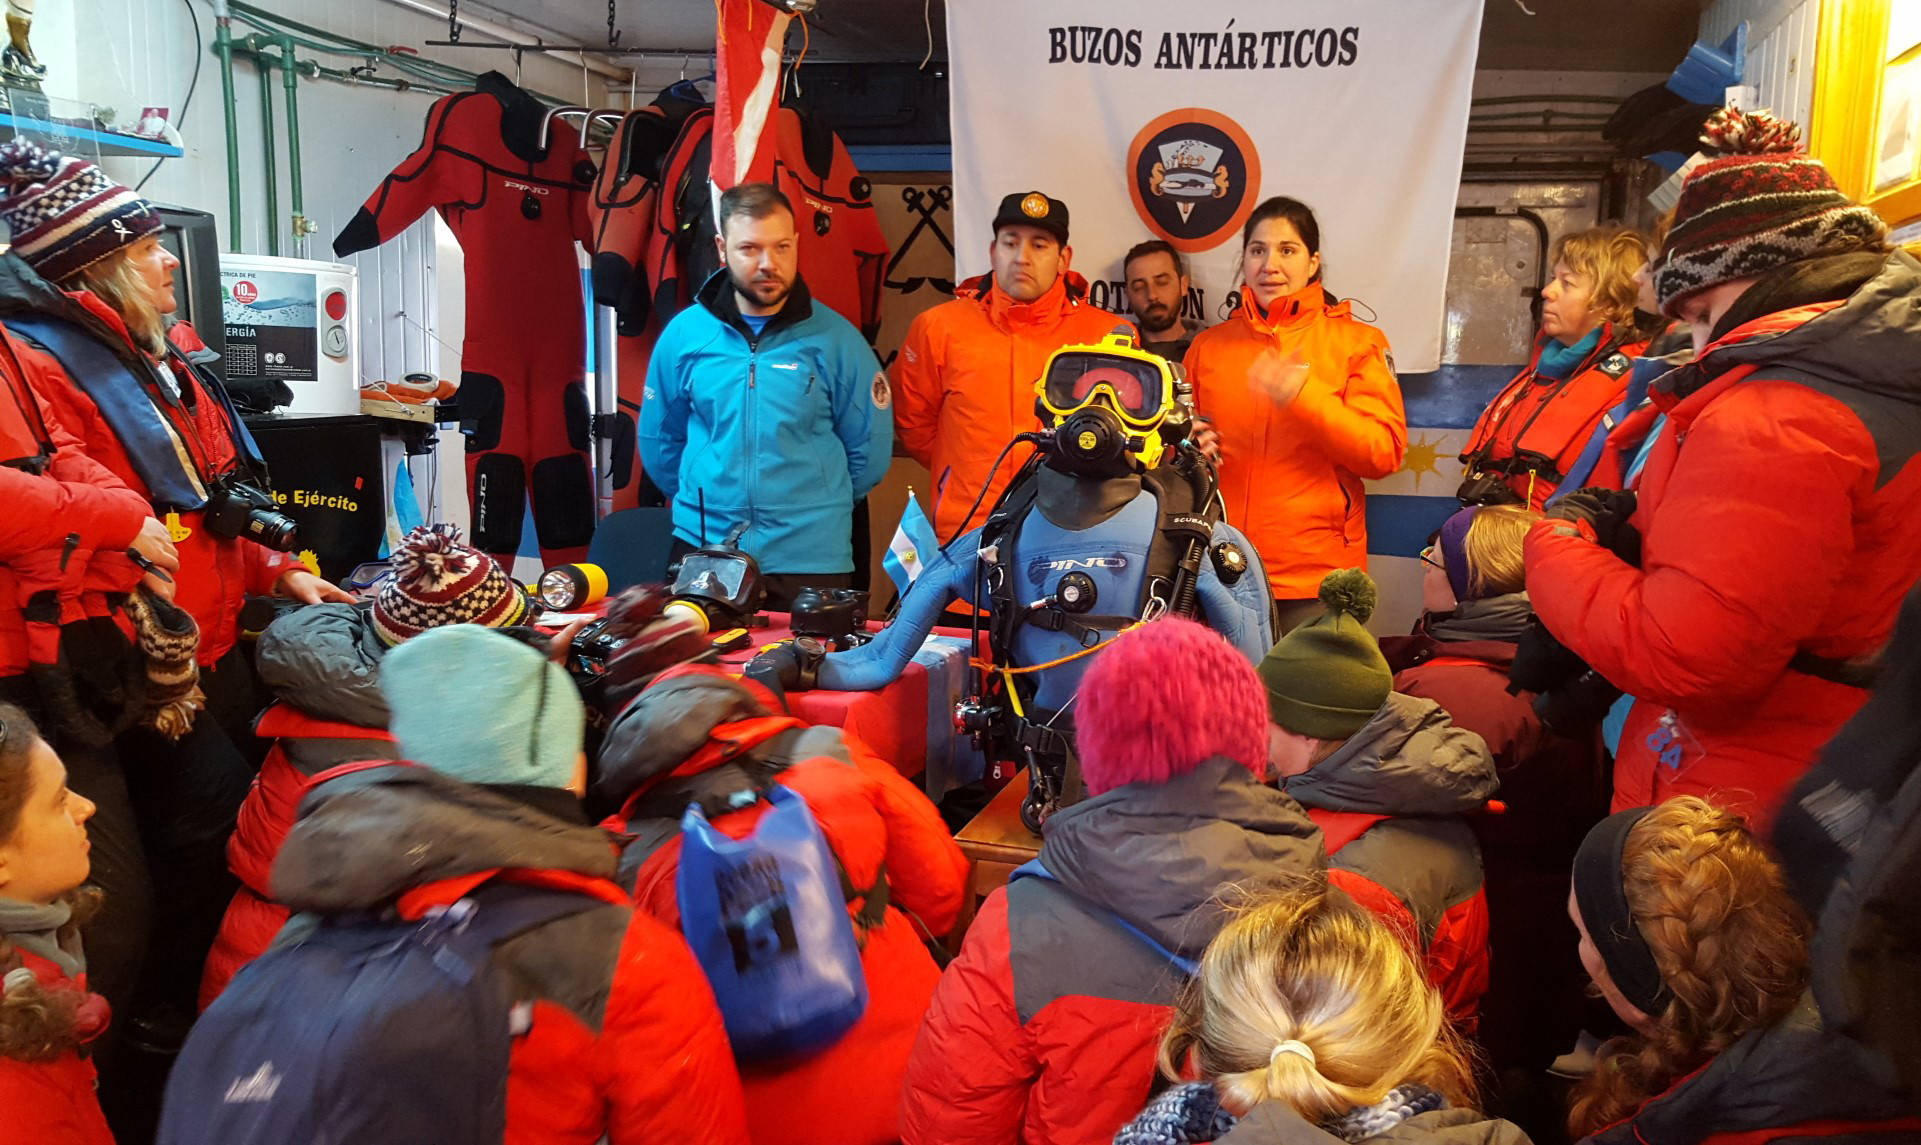 Homeward Bound participants learning about the dive program at Carlini Base, one of Argentina’s 13 research stations in Antarctica. (Photo provided by Sue Mauger)